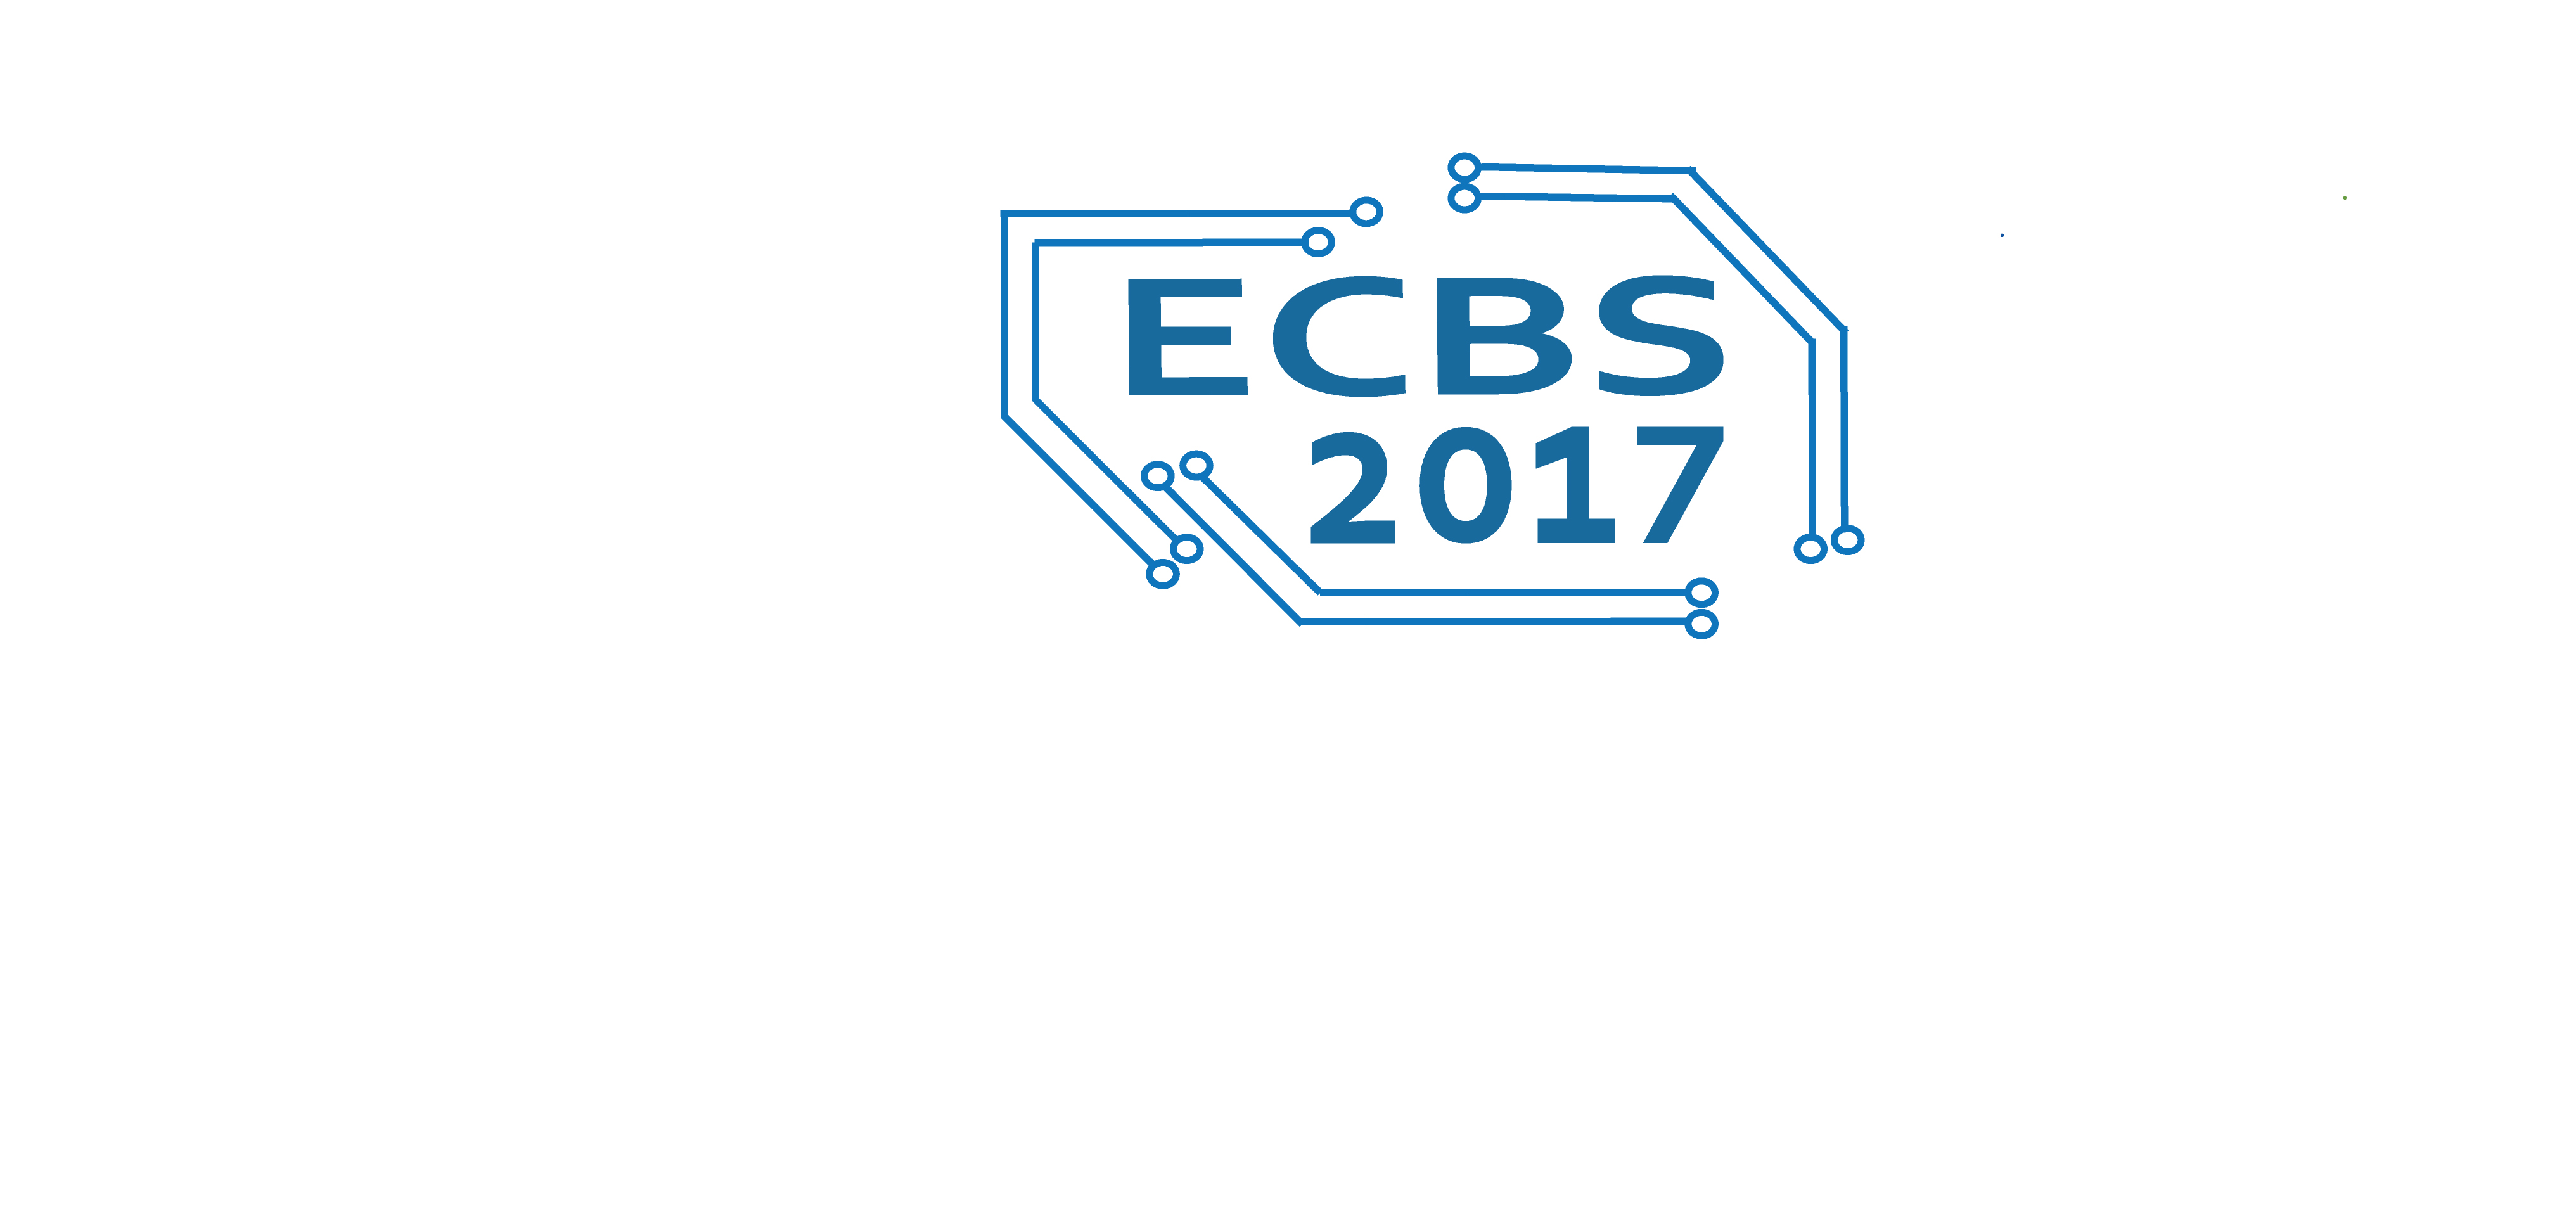 ECBS 2017 is a formal meeting dedicated to formulating and advancing
methods, techniques, and tools for engineering of computer-based systems.
The conference is devoted to the design, development, deployment, and
analysis of the complex systems whose behavior is largely determined or
controlled by computers. Such systems are characterized by functional,
performance, and reliability requirements that mandate the tight integration
of information processing and physical processes.

ECBS integrates software, hardware, and communication perspective of 
system engineering through its many facets that include system modeling,
requirements specification, simulation, architectures, safety, security,
reliability, human-computer interaction, system integration, verification and
validation, high performance/parallel computing, cloud-based technologies,
and project management.